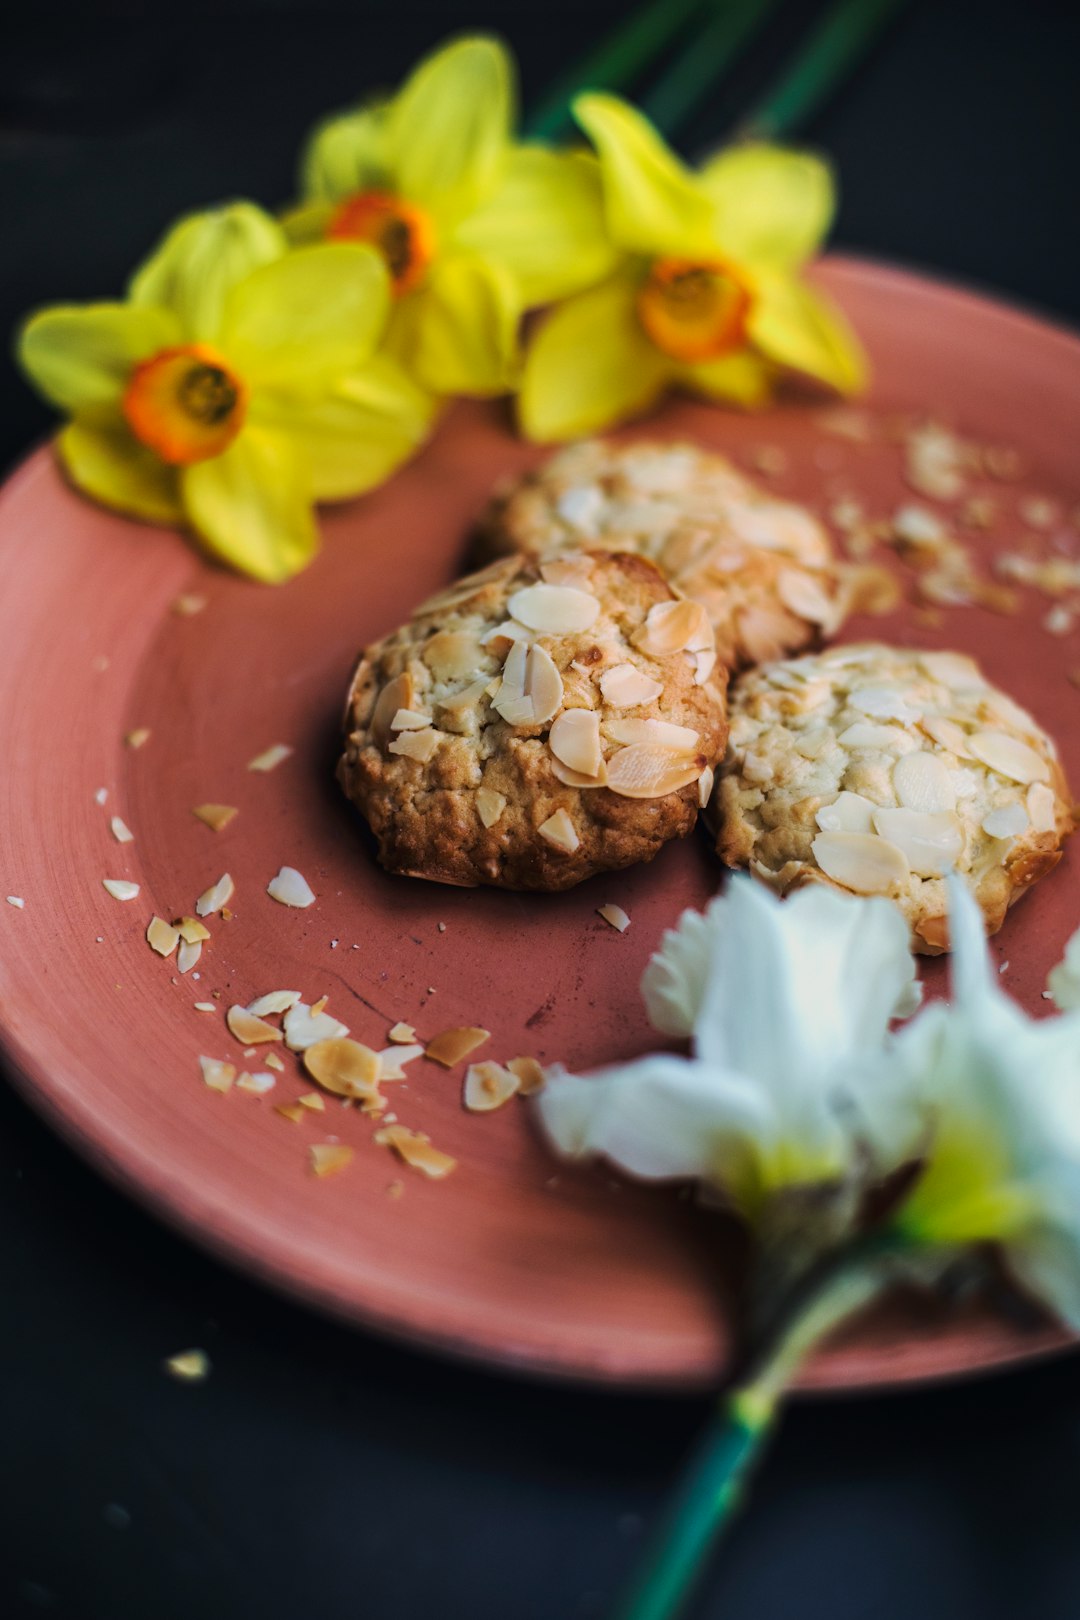 oatmeal cookies and daffodil flowers on plate